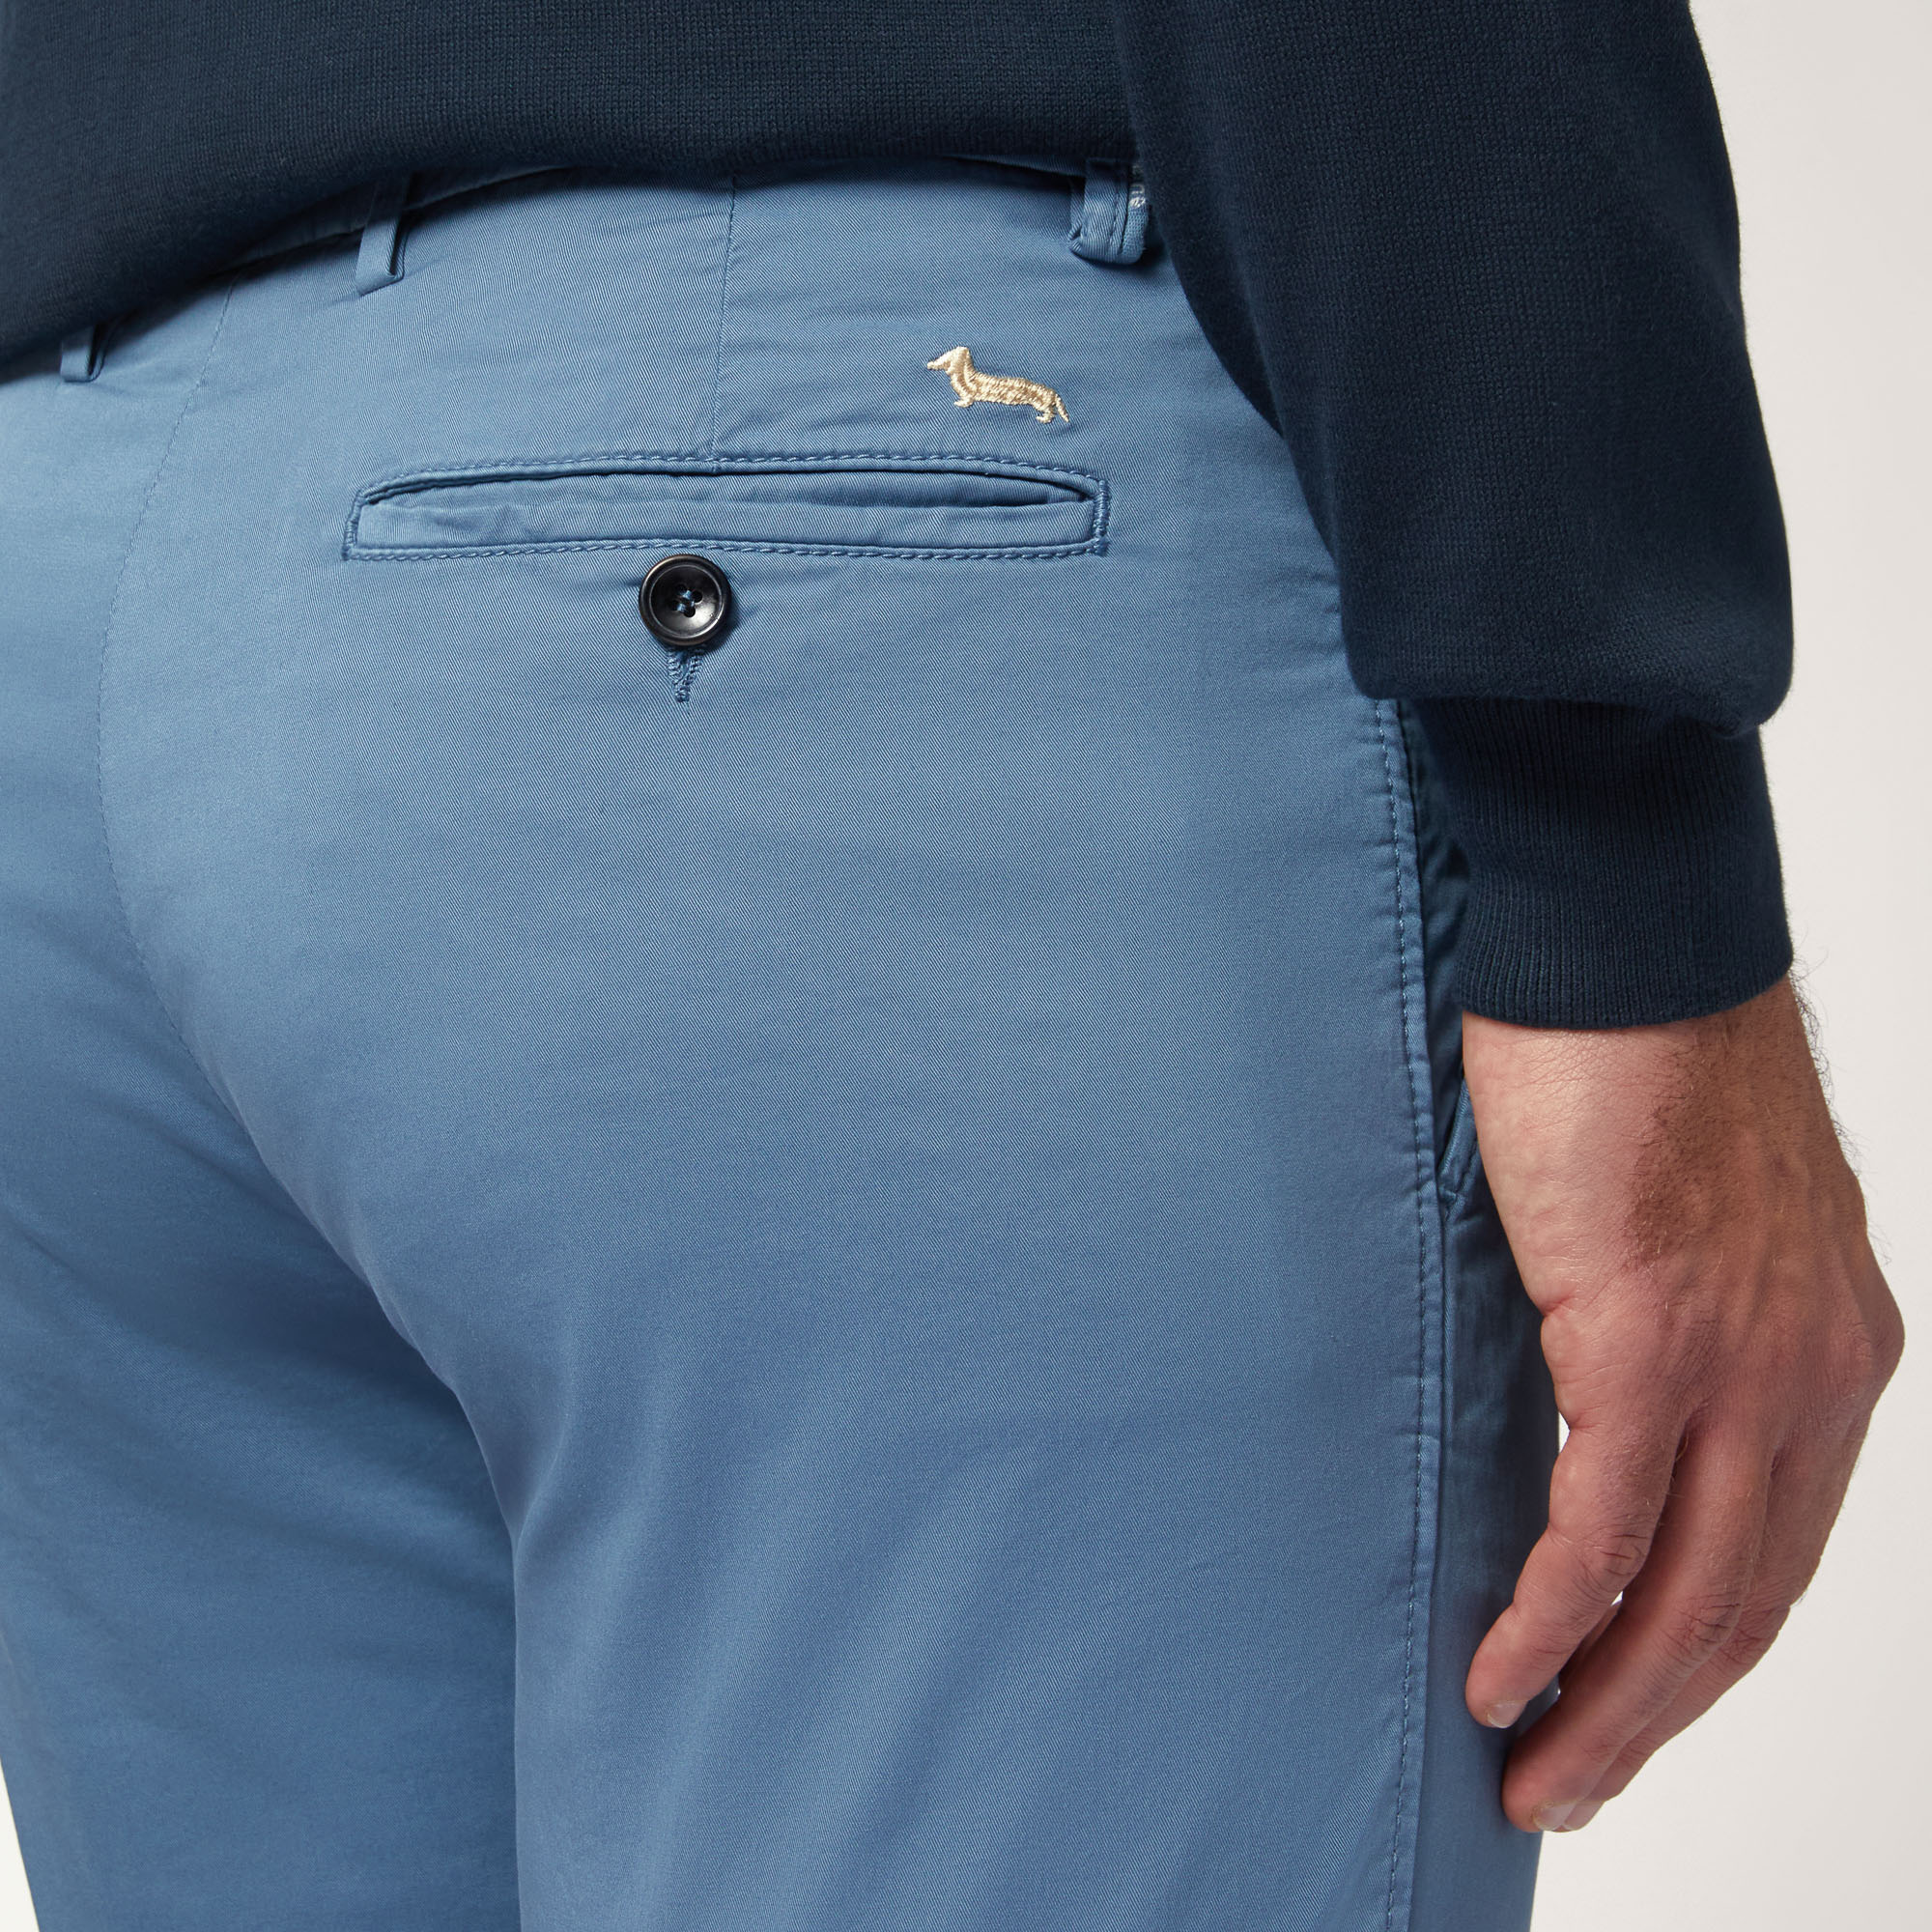 Narrow Fit Chino Pants, Blue, large image number 2